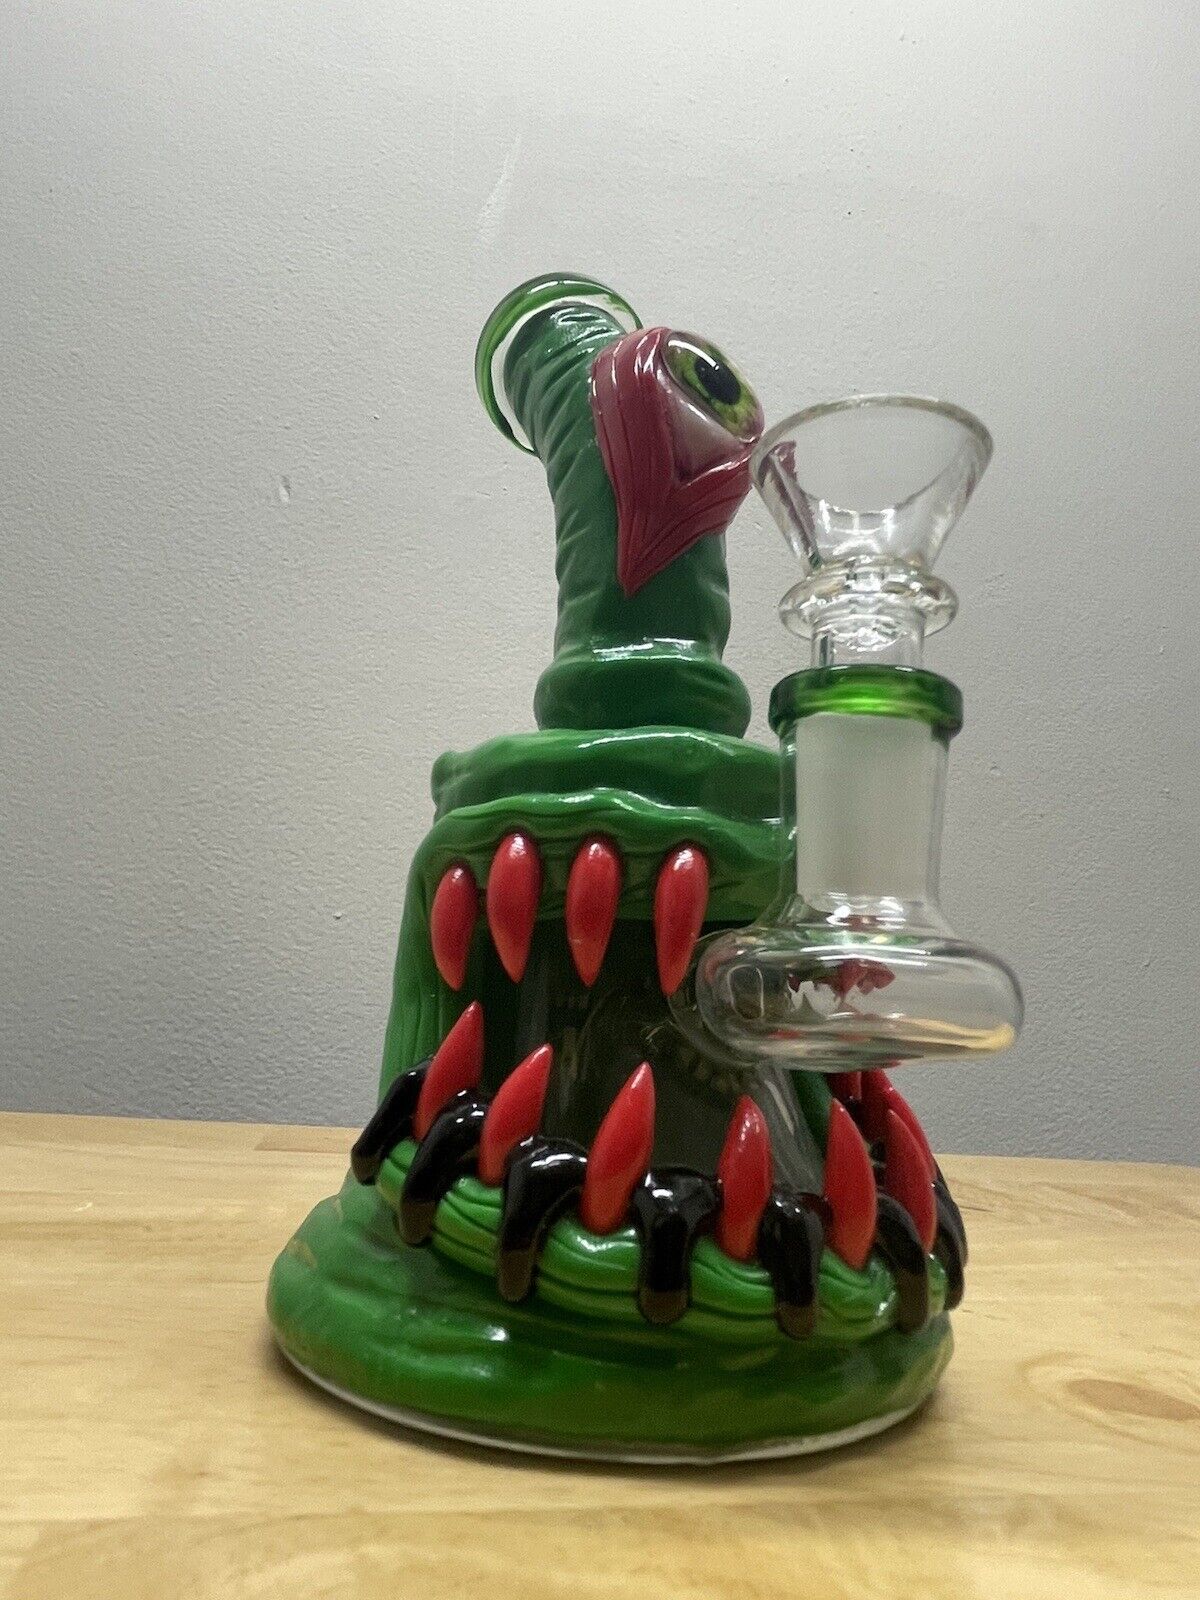 (Green/Red) Unique 3D Design Blown Glass Tobacco Water Pipe Bong w/ 14mm Bowl